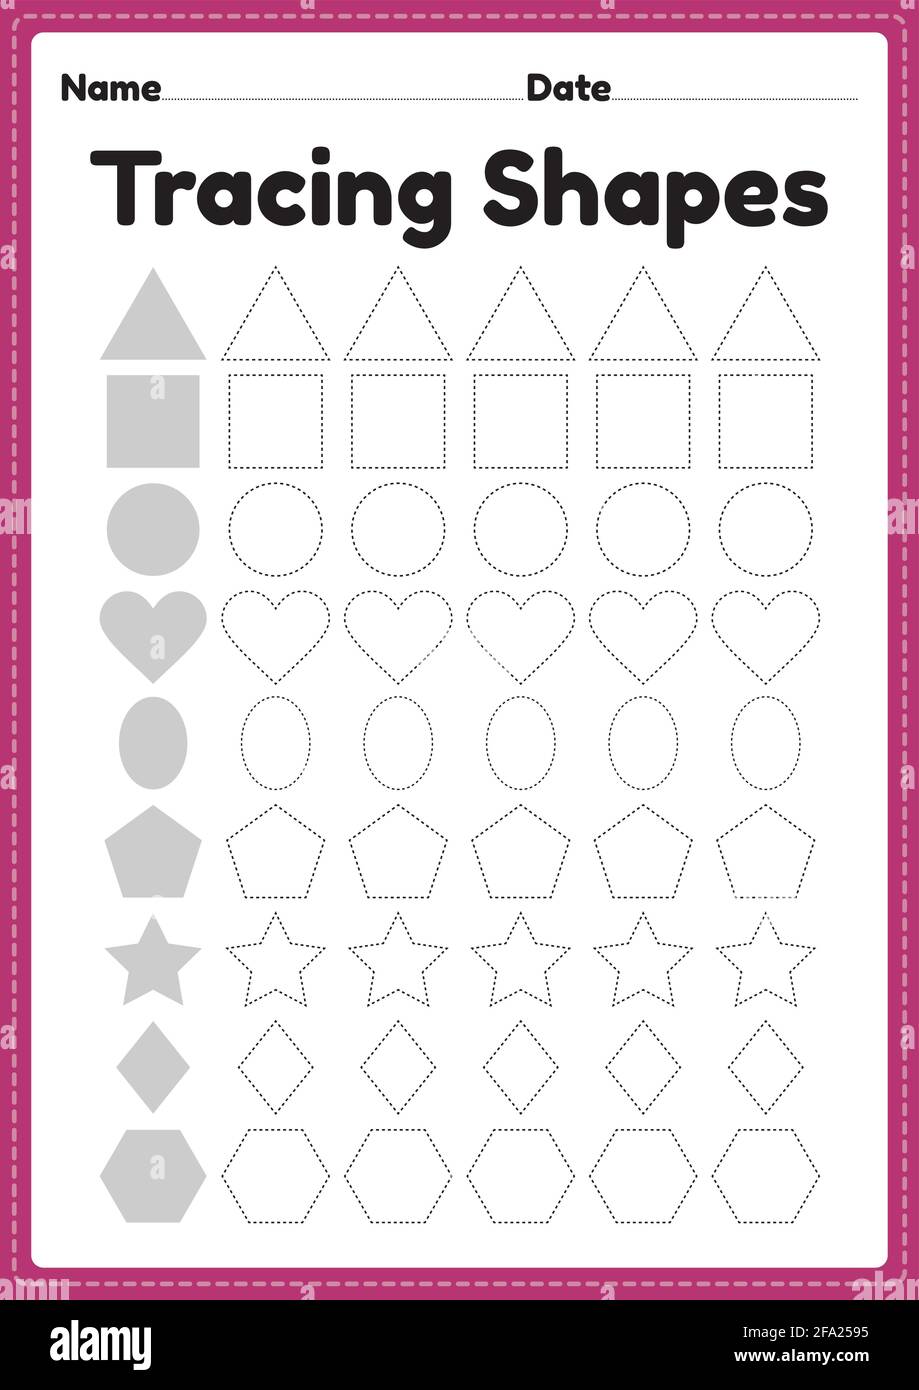 Tracing shapes worksheet for kindergarten and preschool kids for handwriting practice and educational activities in a printable page illustration. Stock Vector